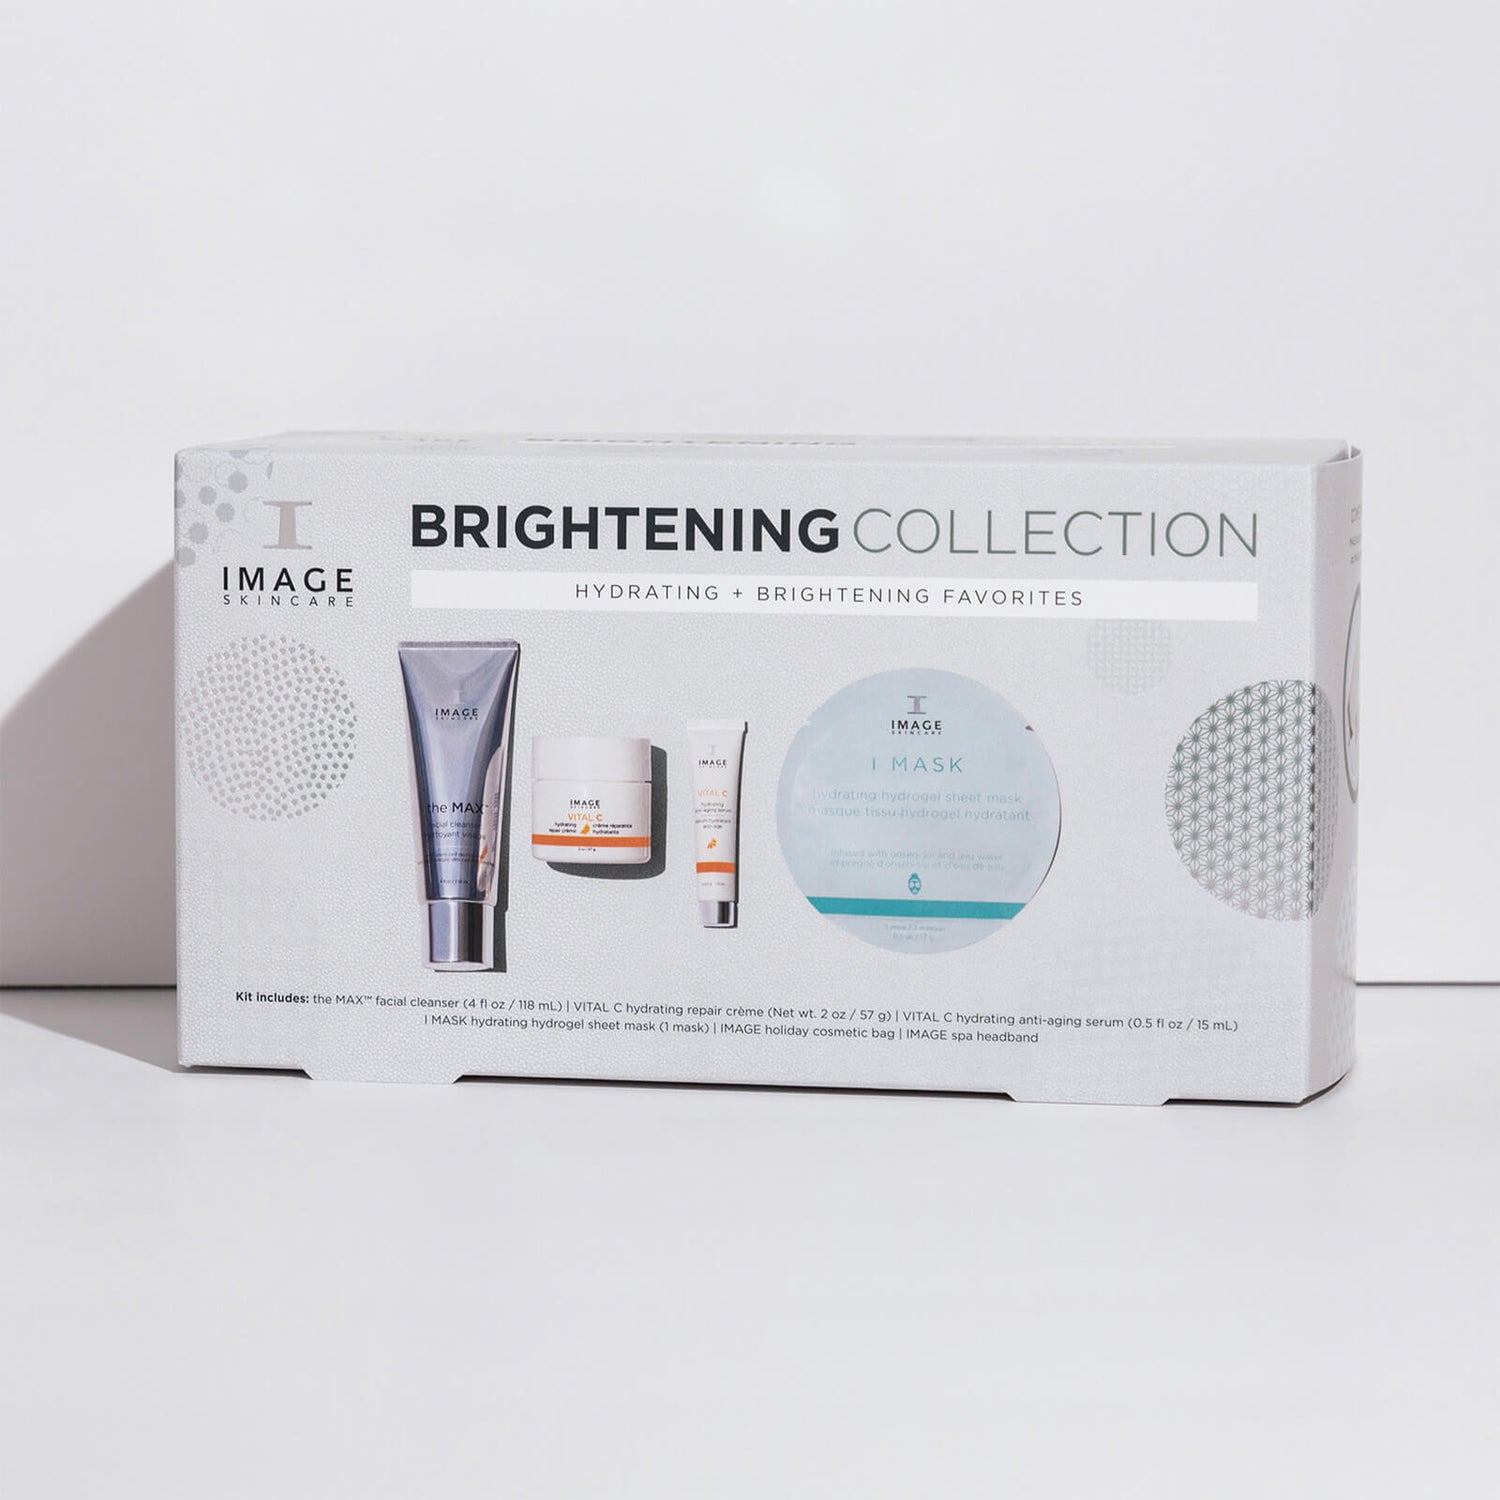 IMAGE Skincare Brightening Collection (Worth $143.50)